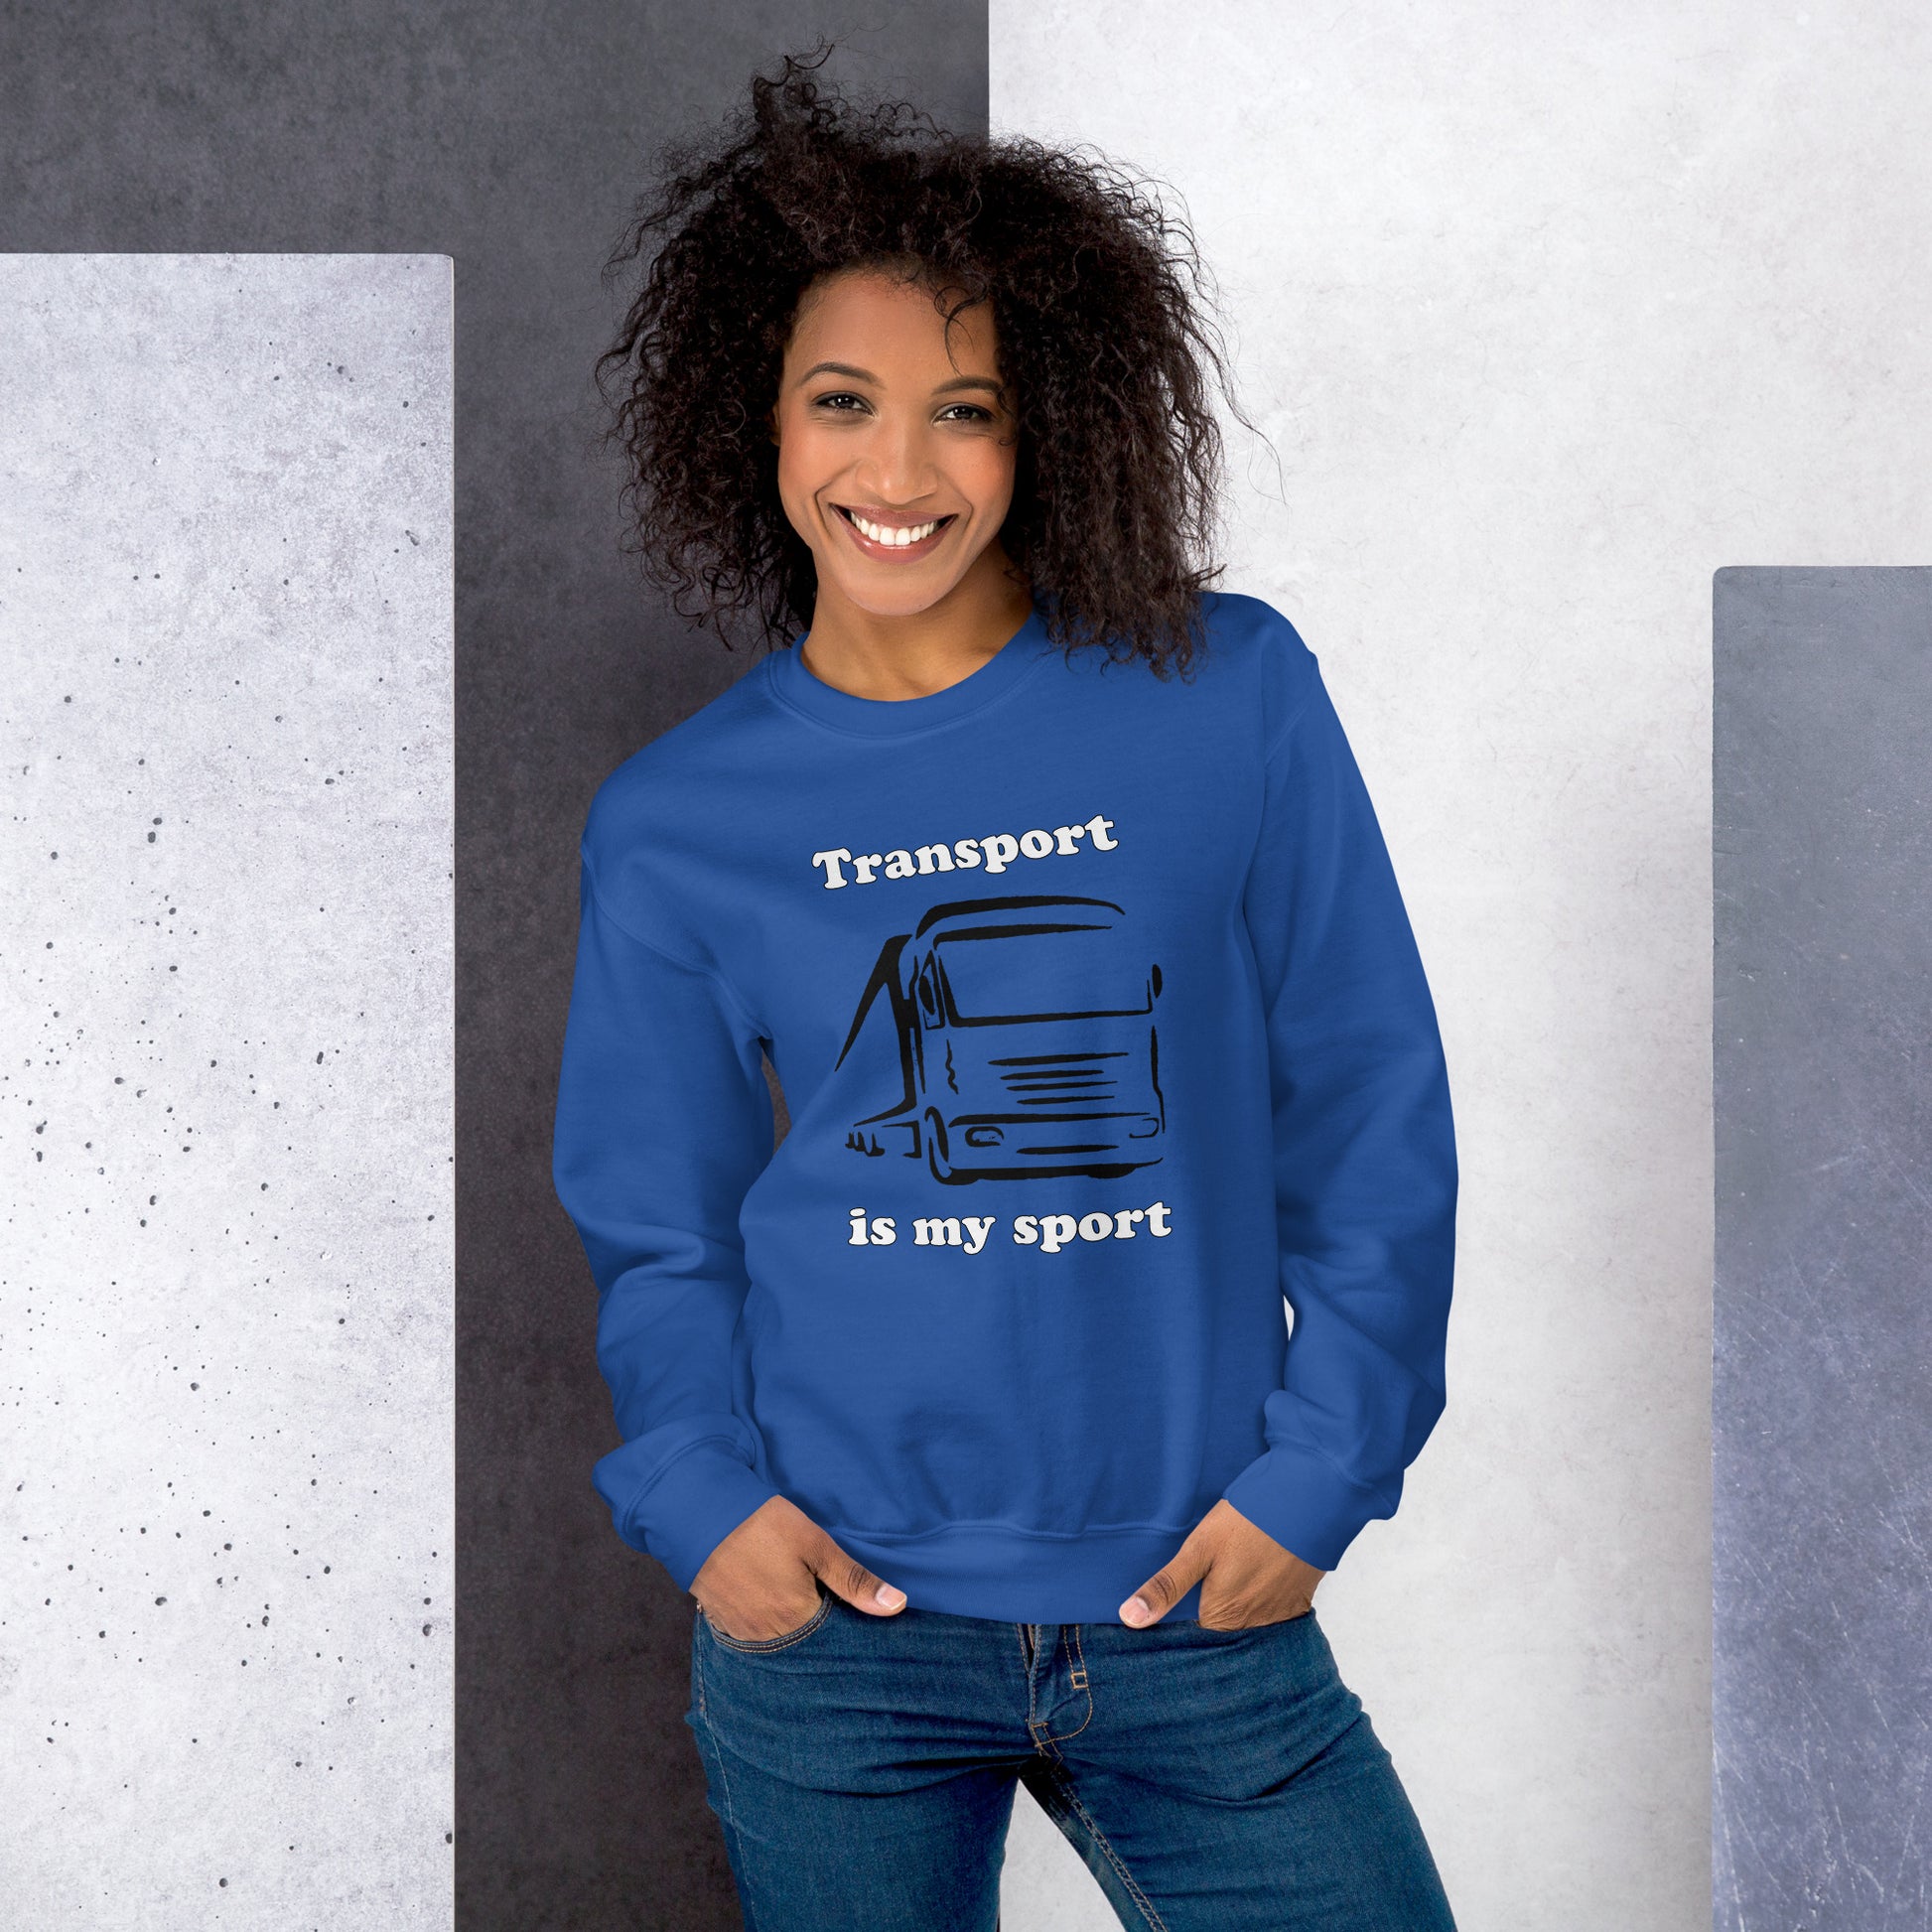 Woman with royal blue sweatshirt with picture of truck and text "Transport is my sport"